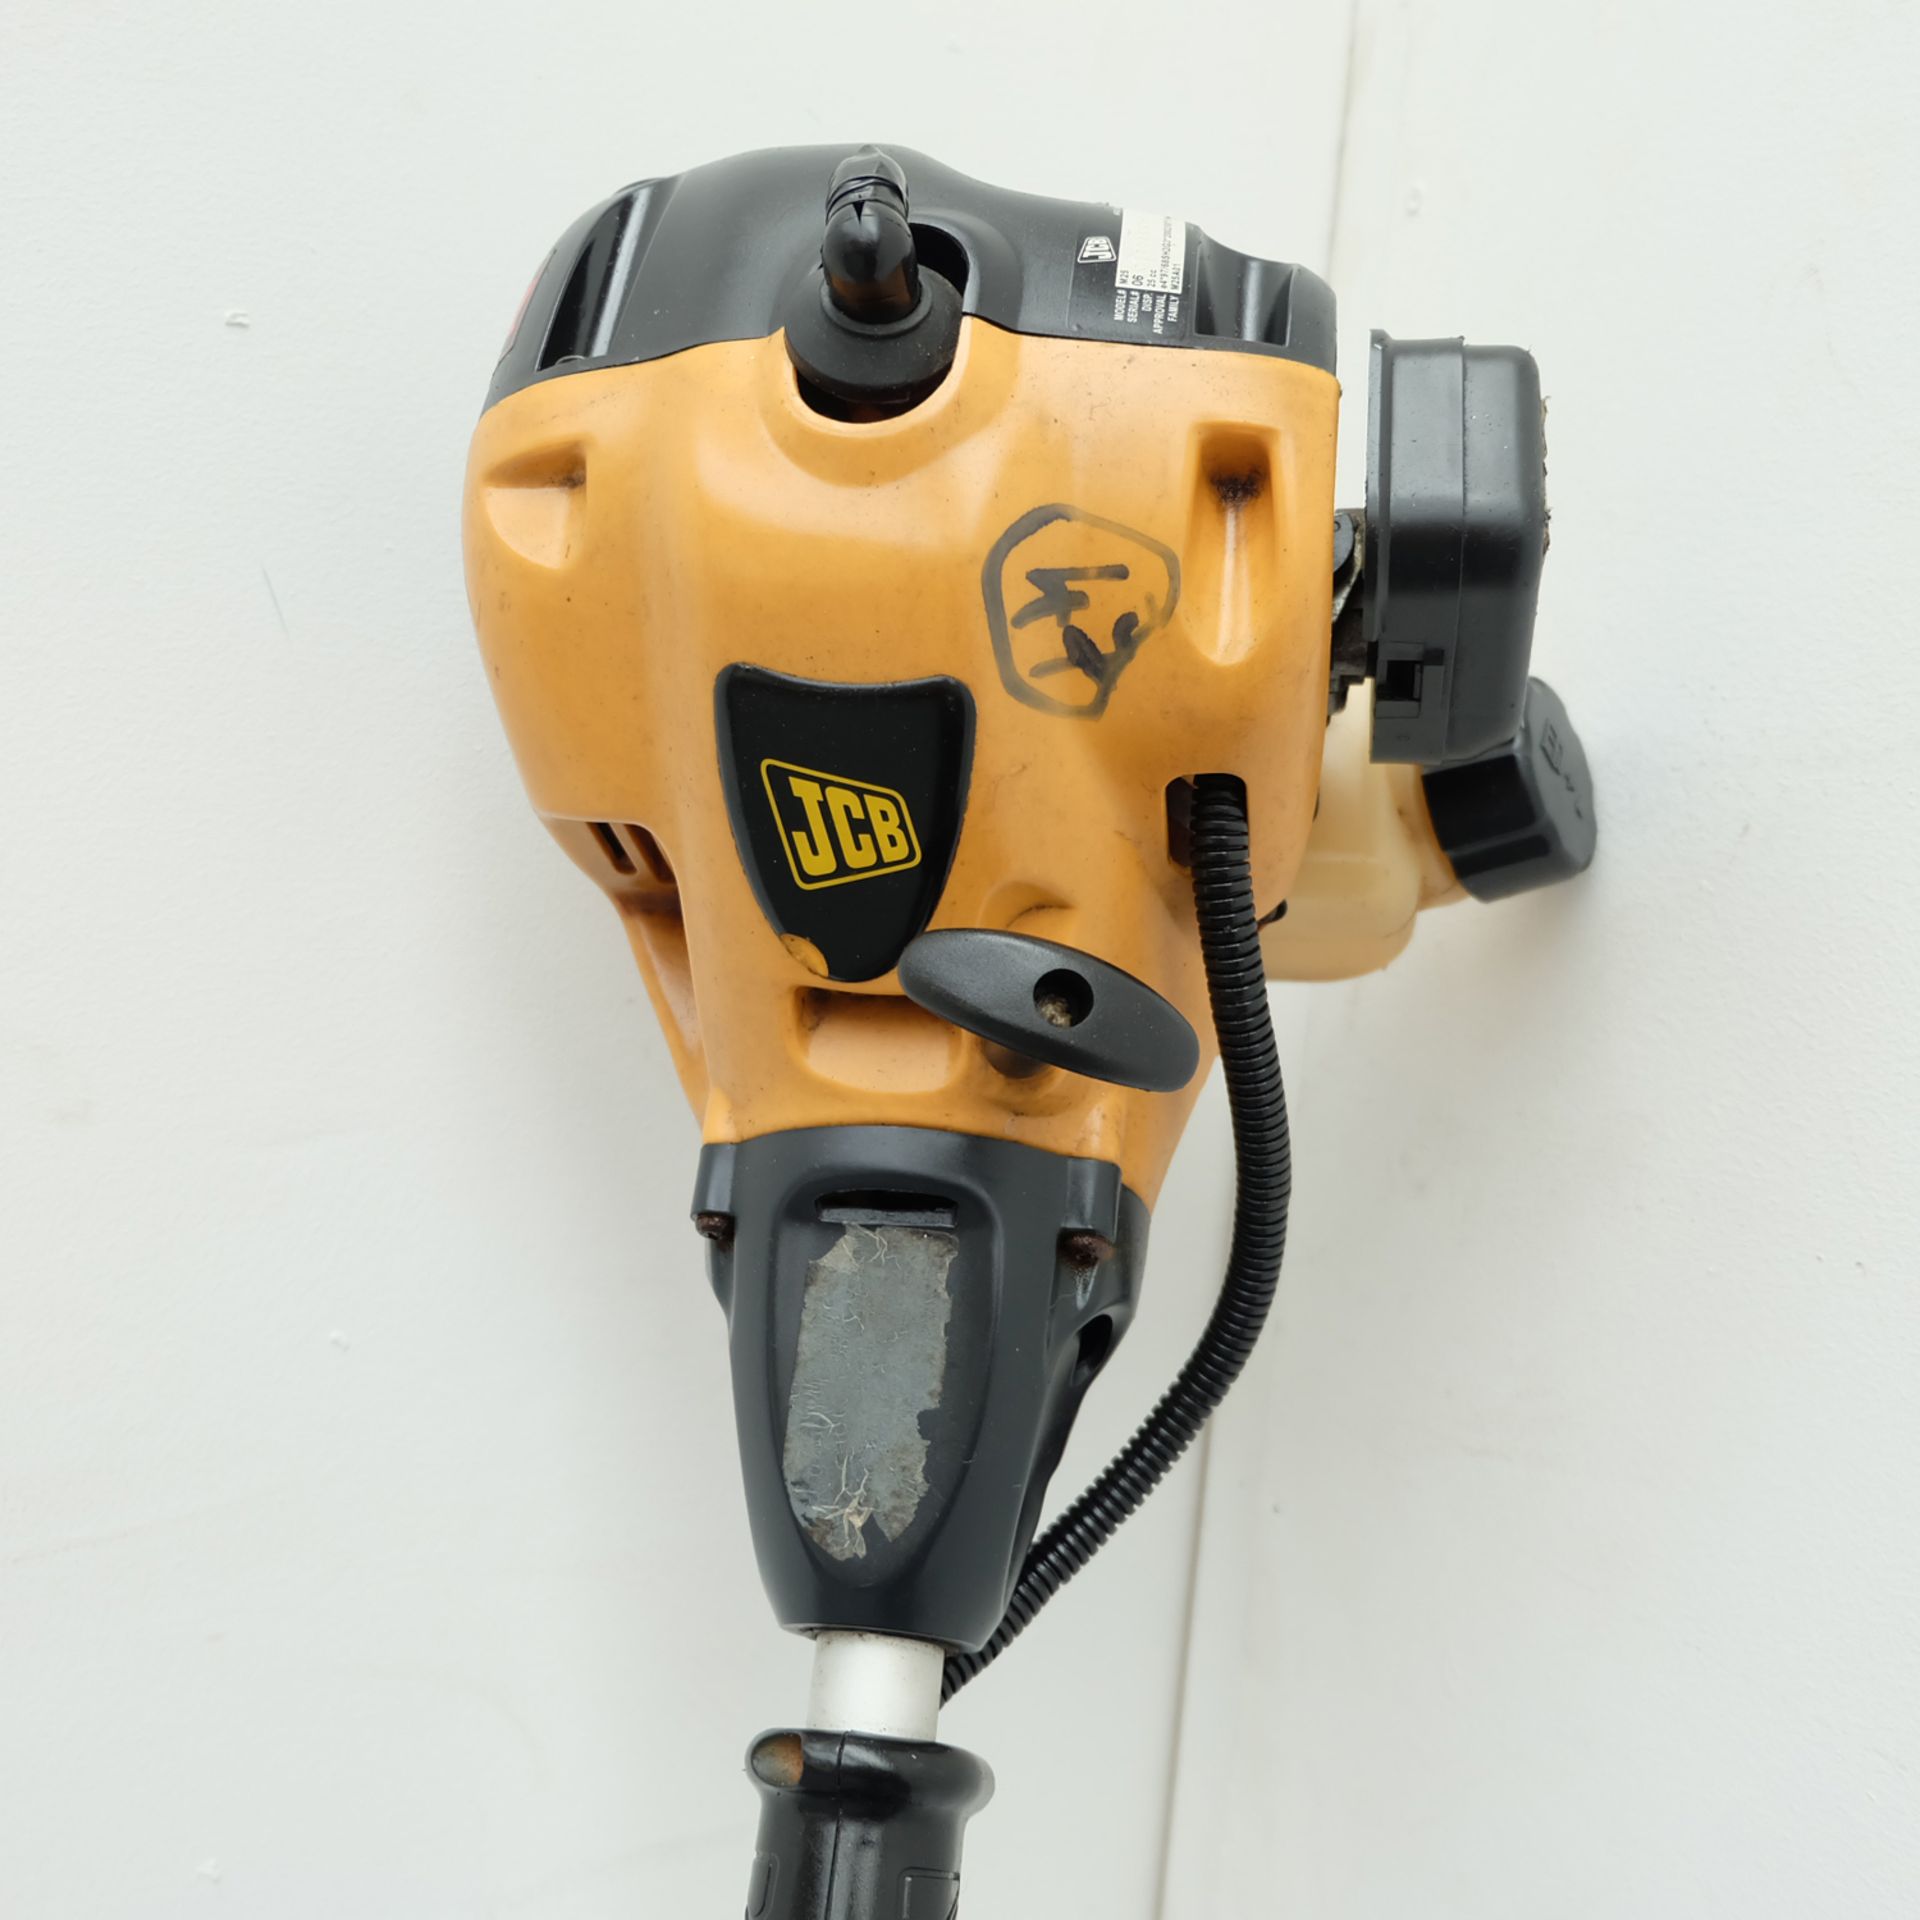 JCB Petrol Powered Strimmer. Rated No Load Speed 11000/Min. - Image 3 of 6